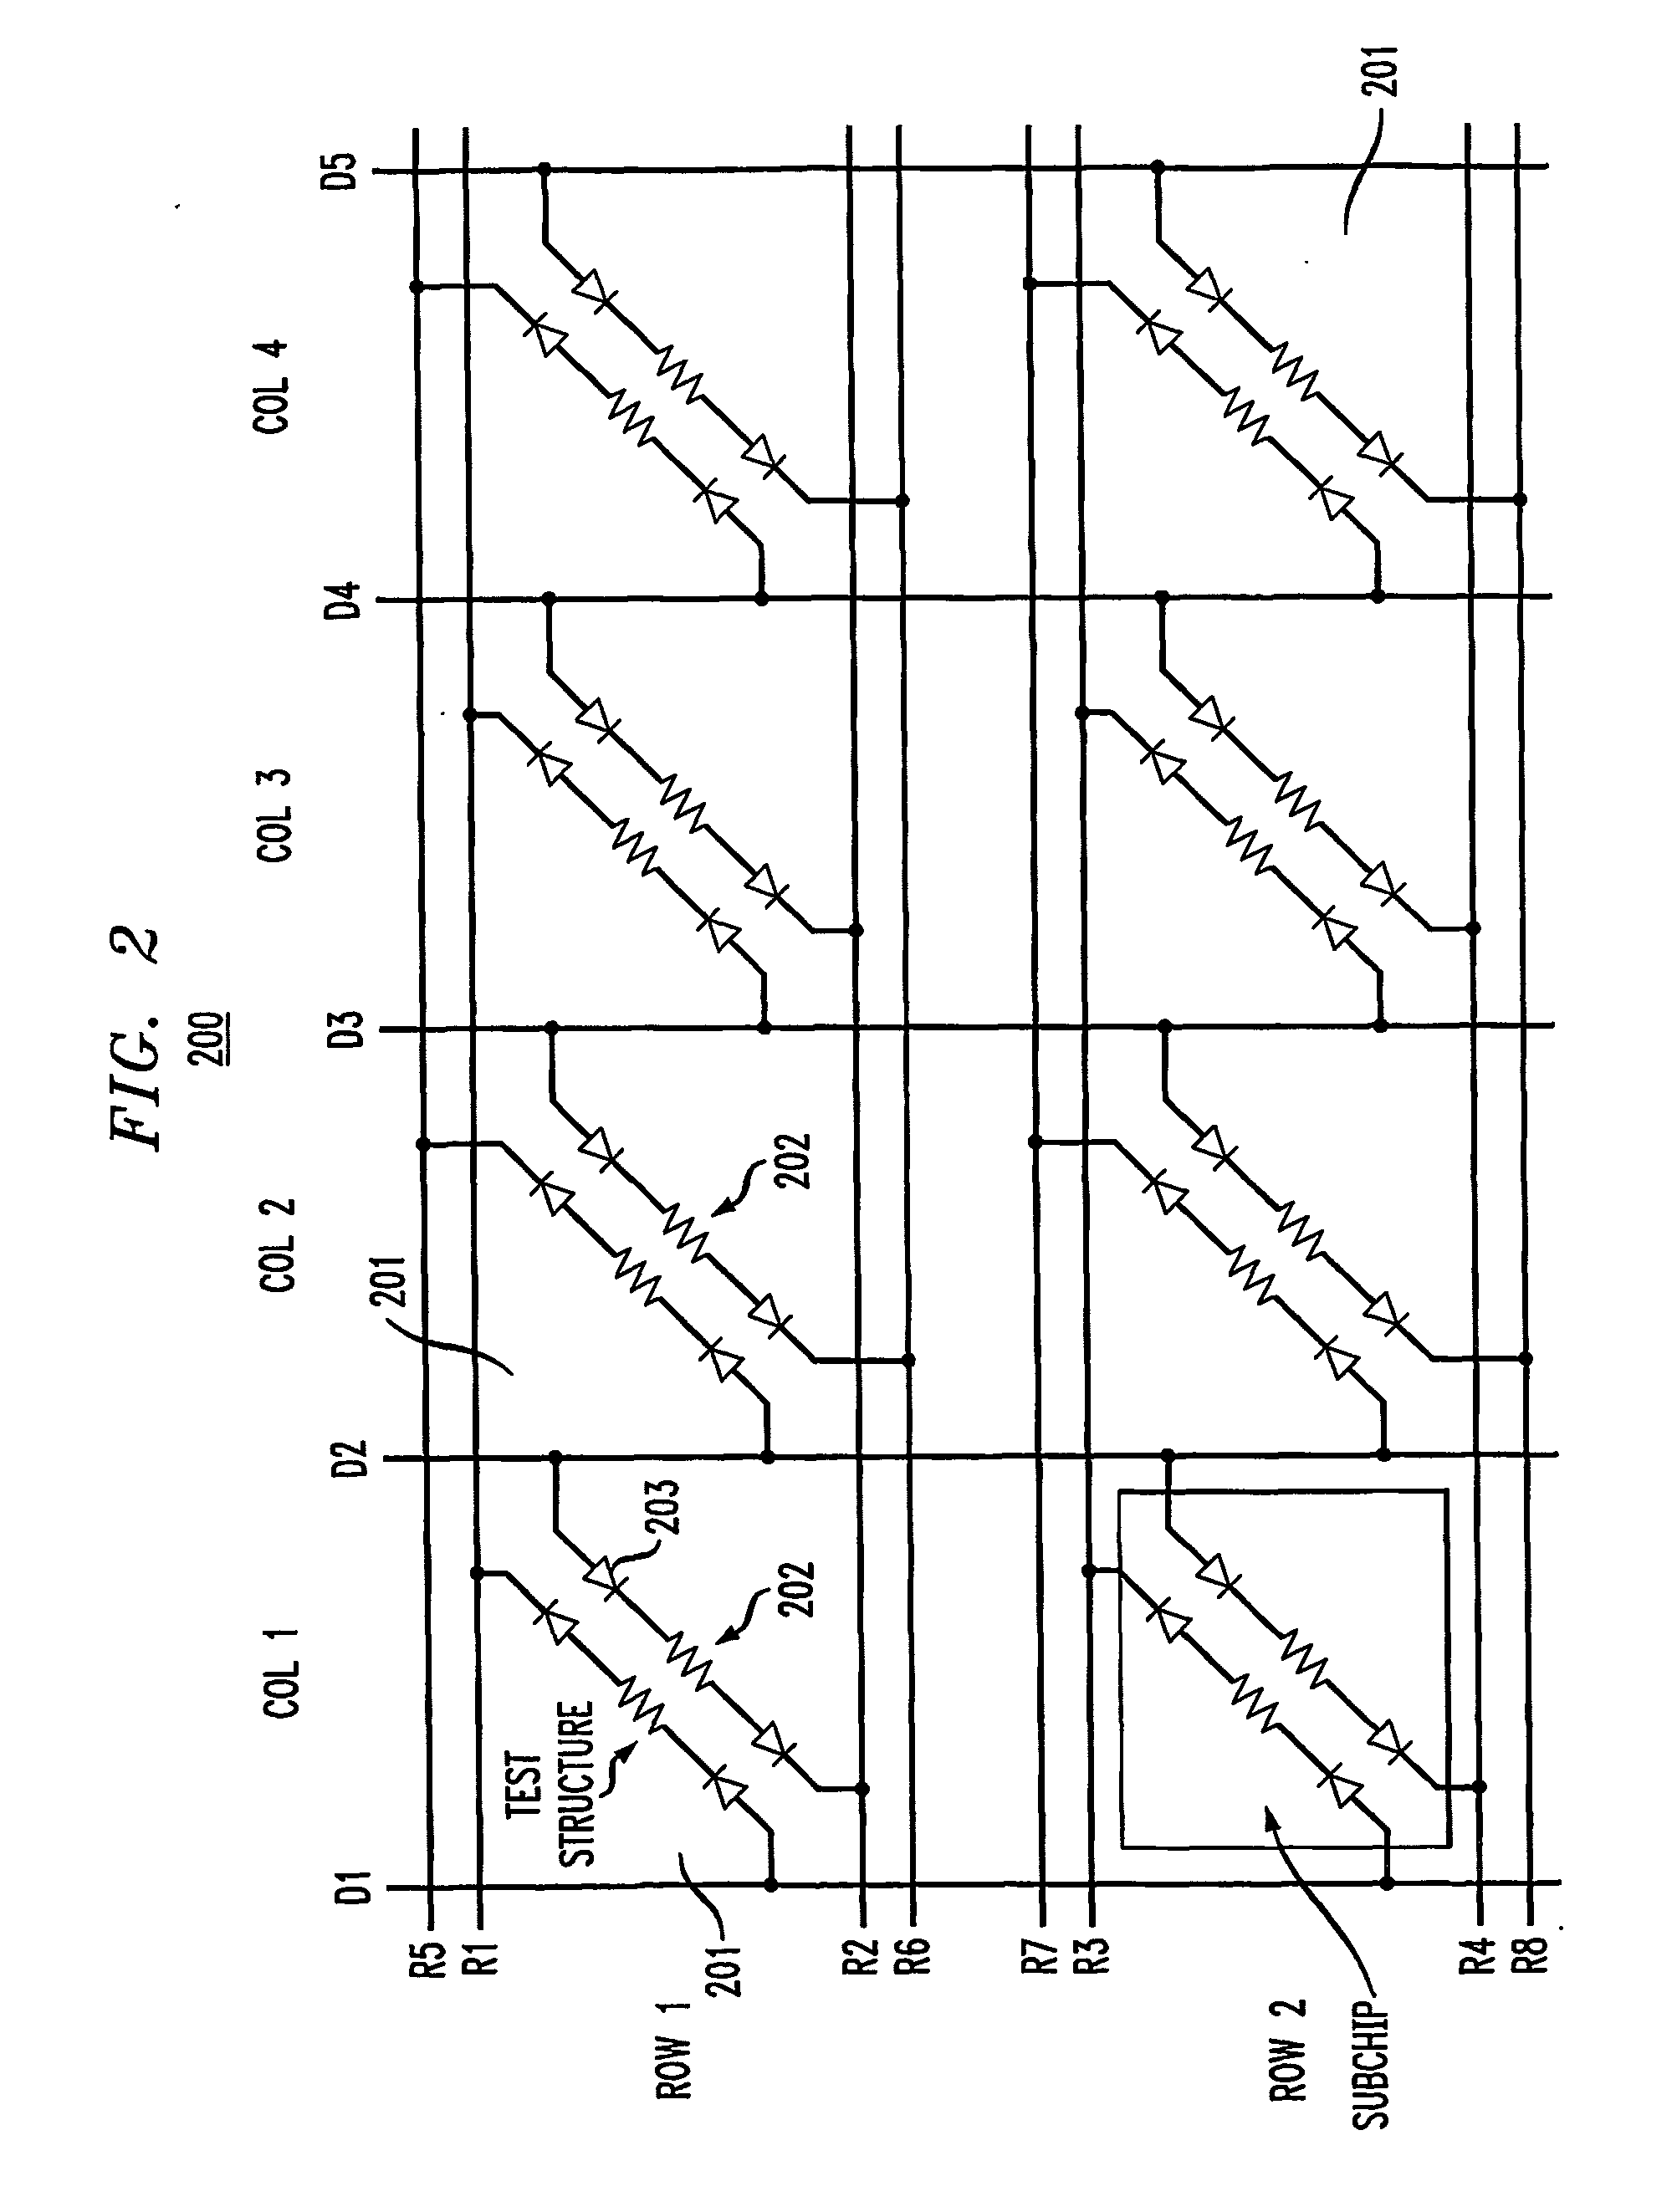 Method and configuration for connecting test structures or line arrays for monitoring integrated circuit manufacturing